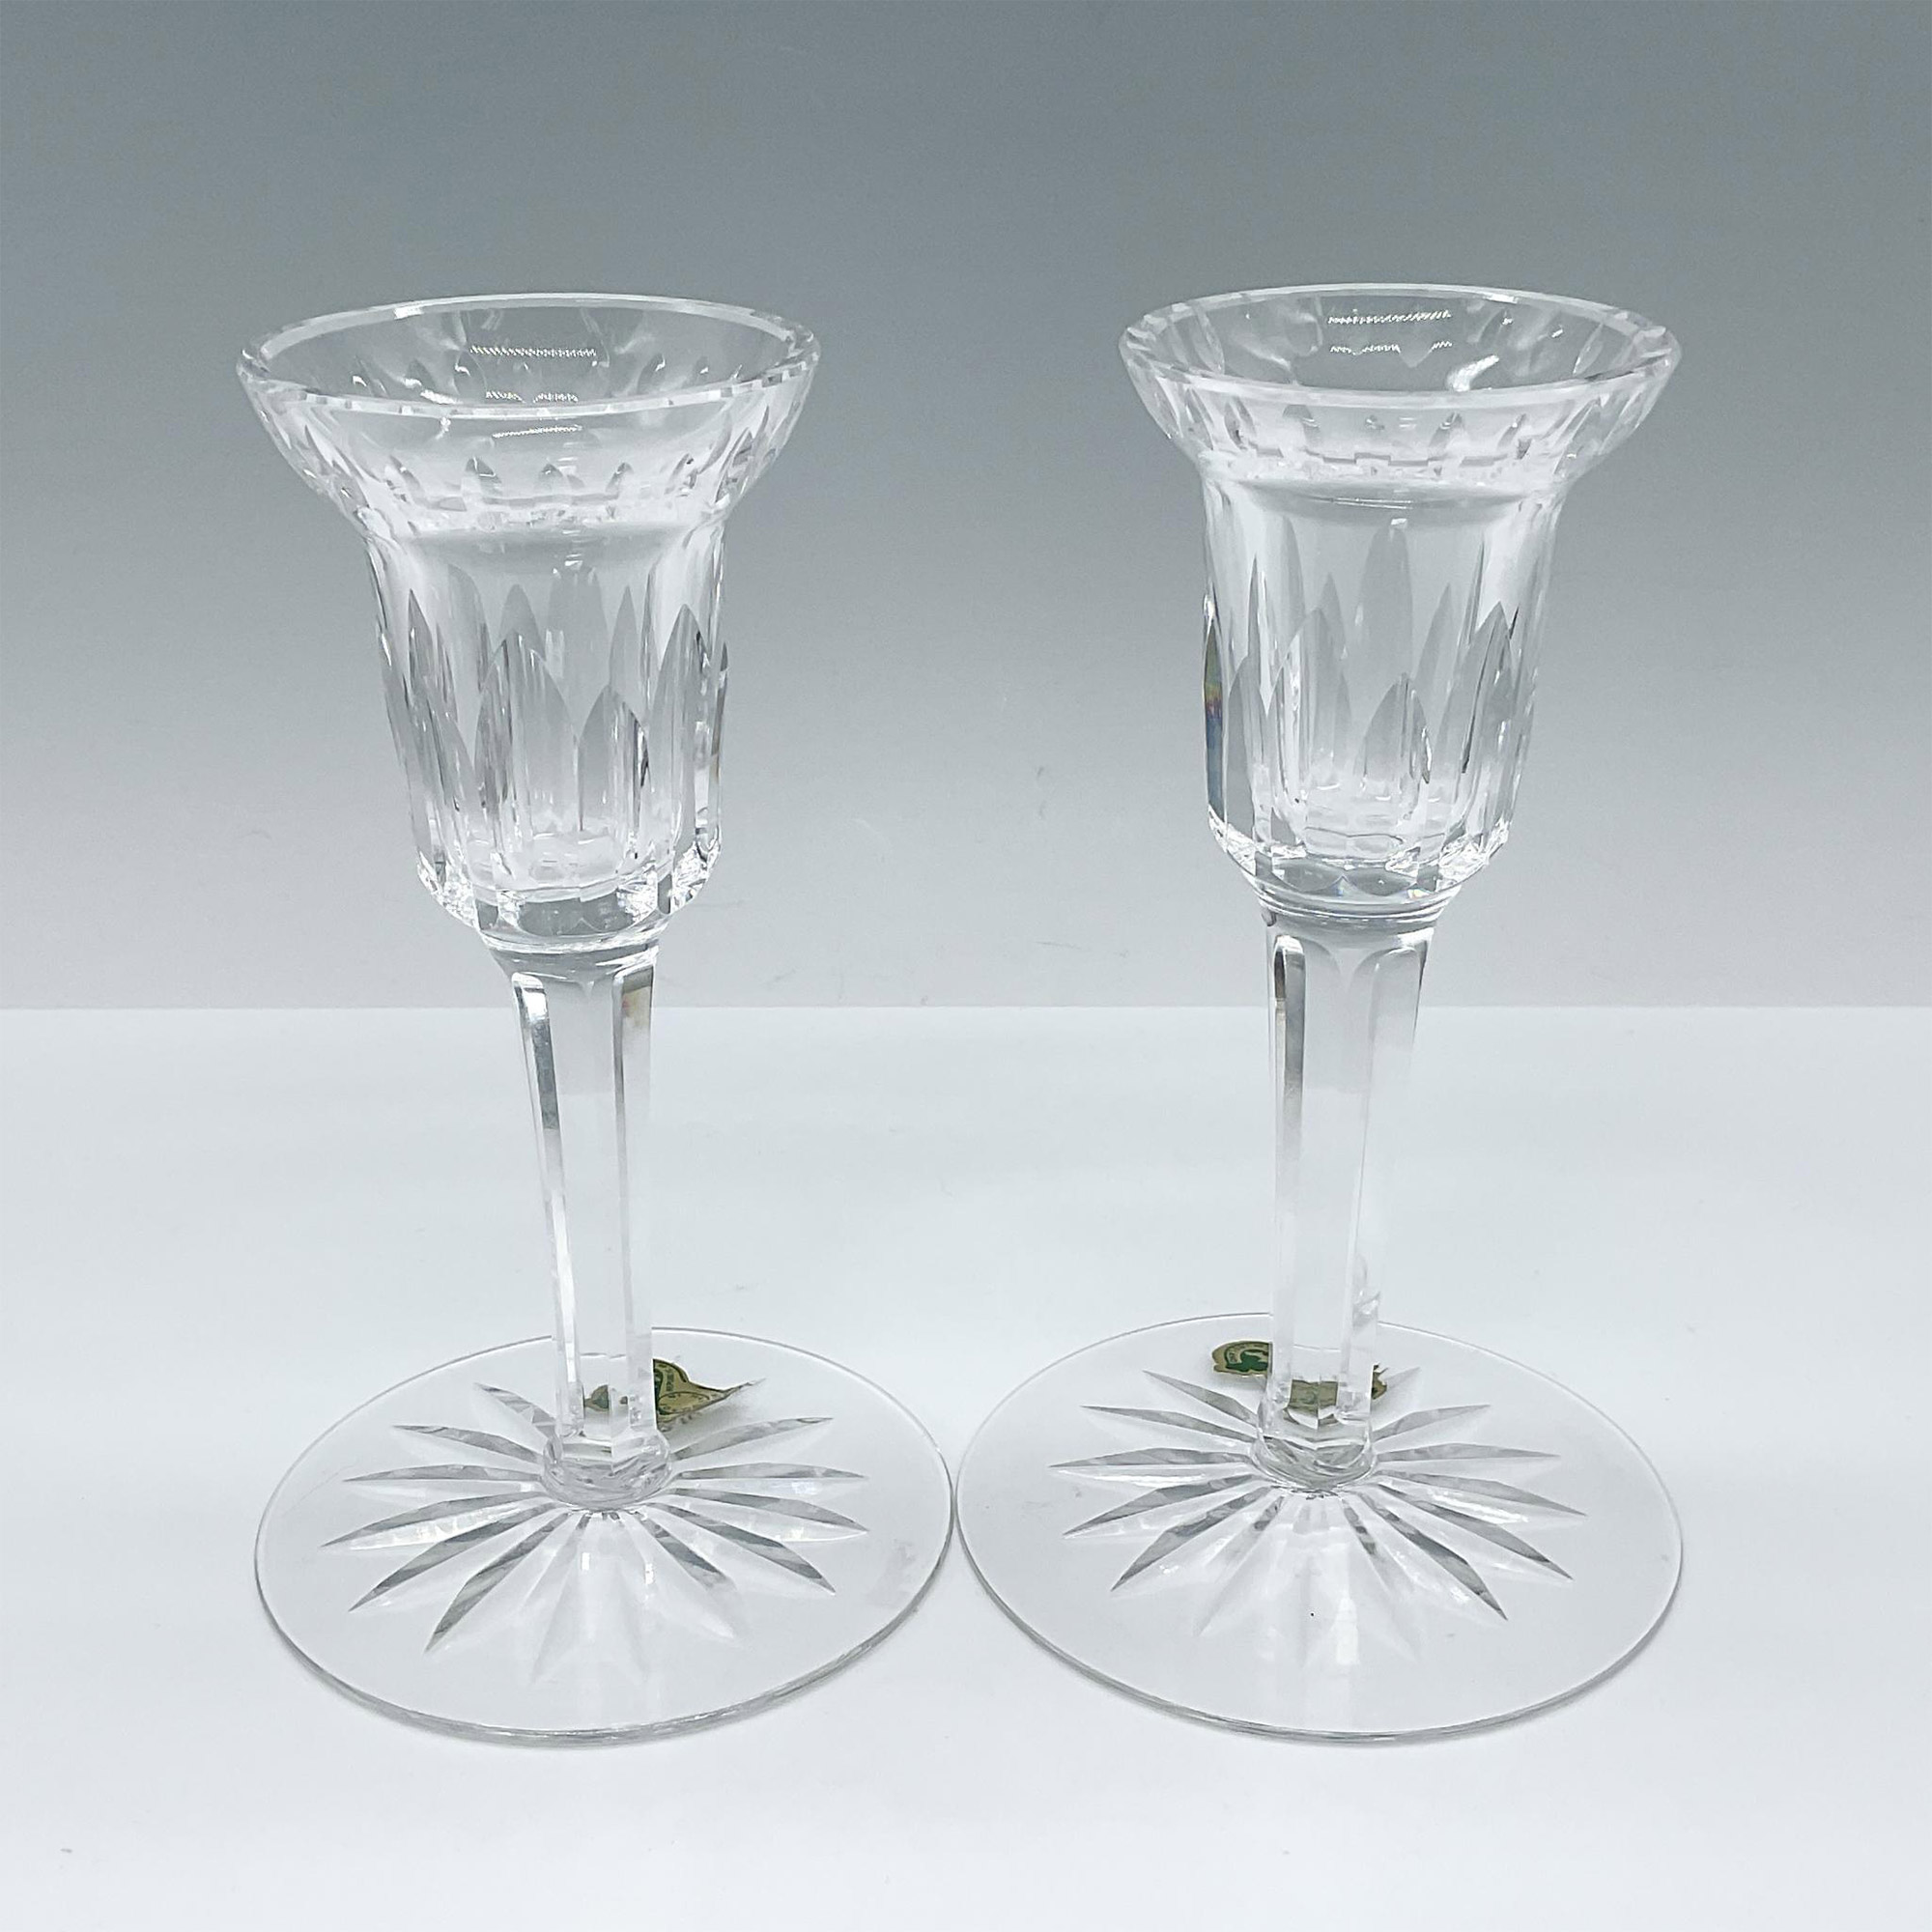 Pair of Waterford Candlesticks - Image 2 of 3